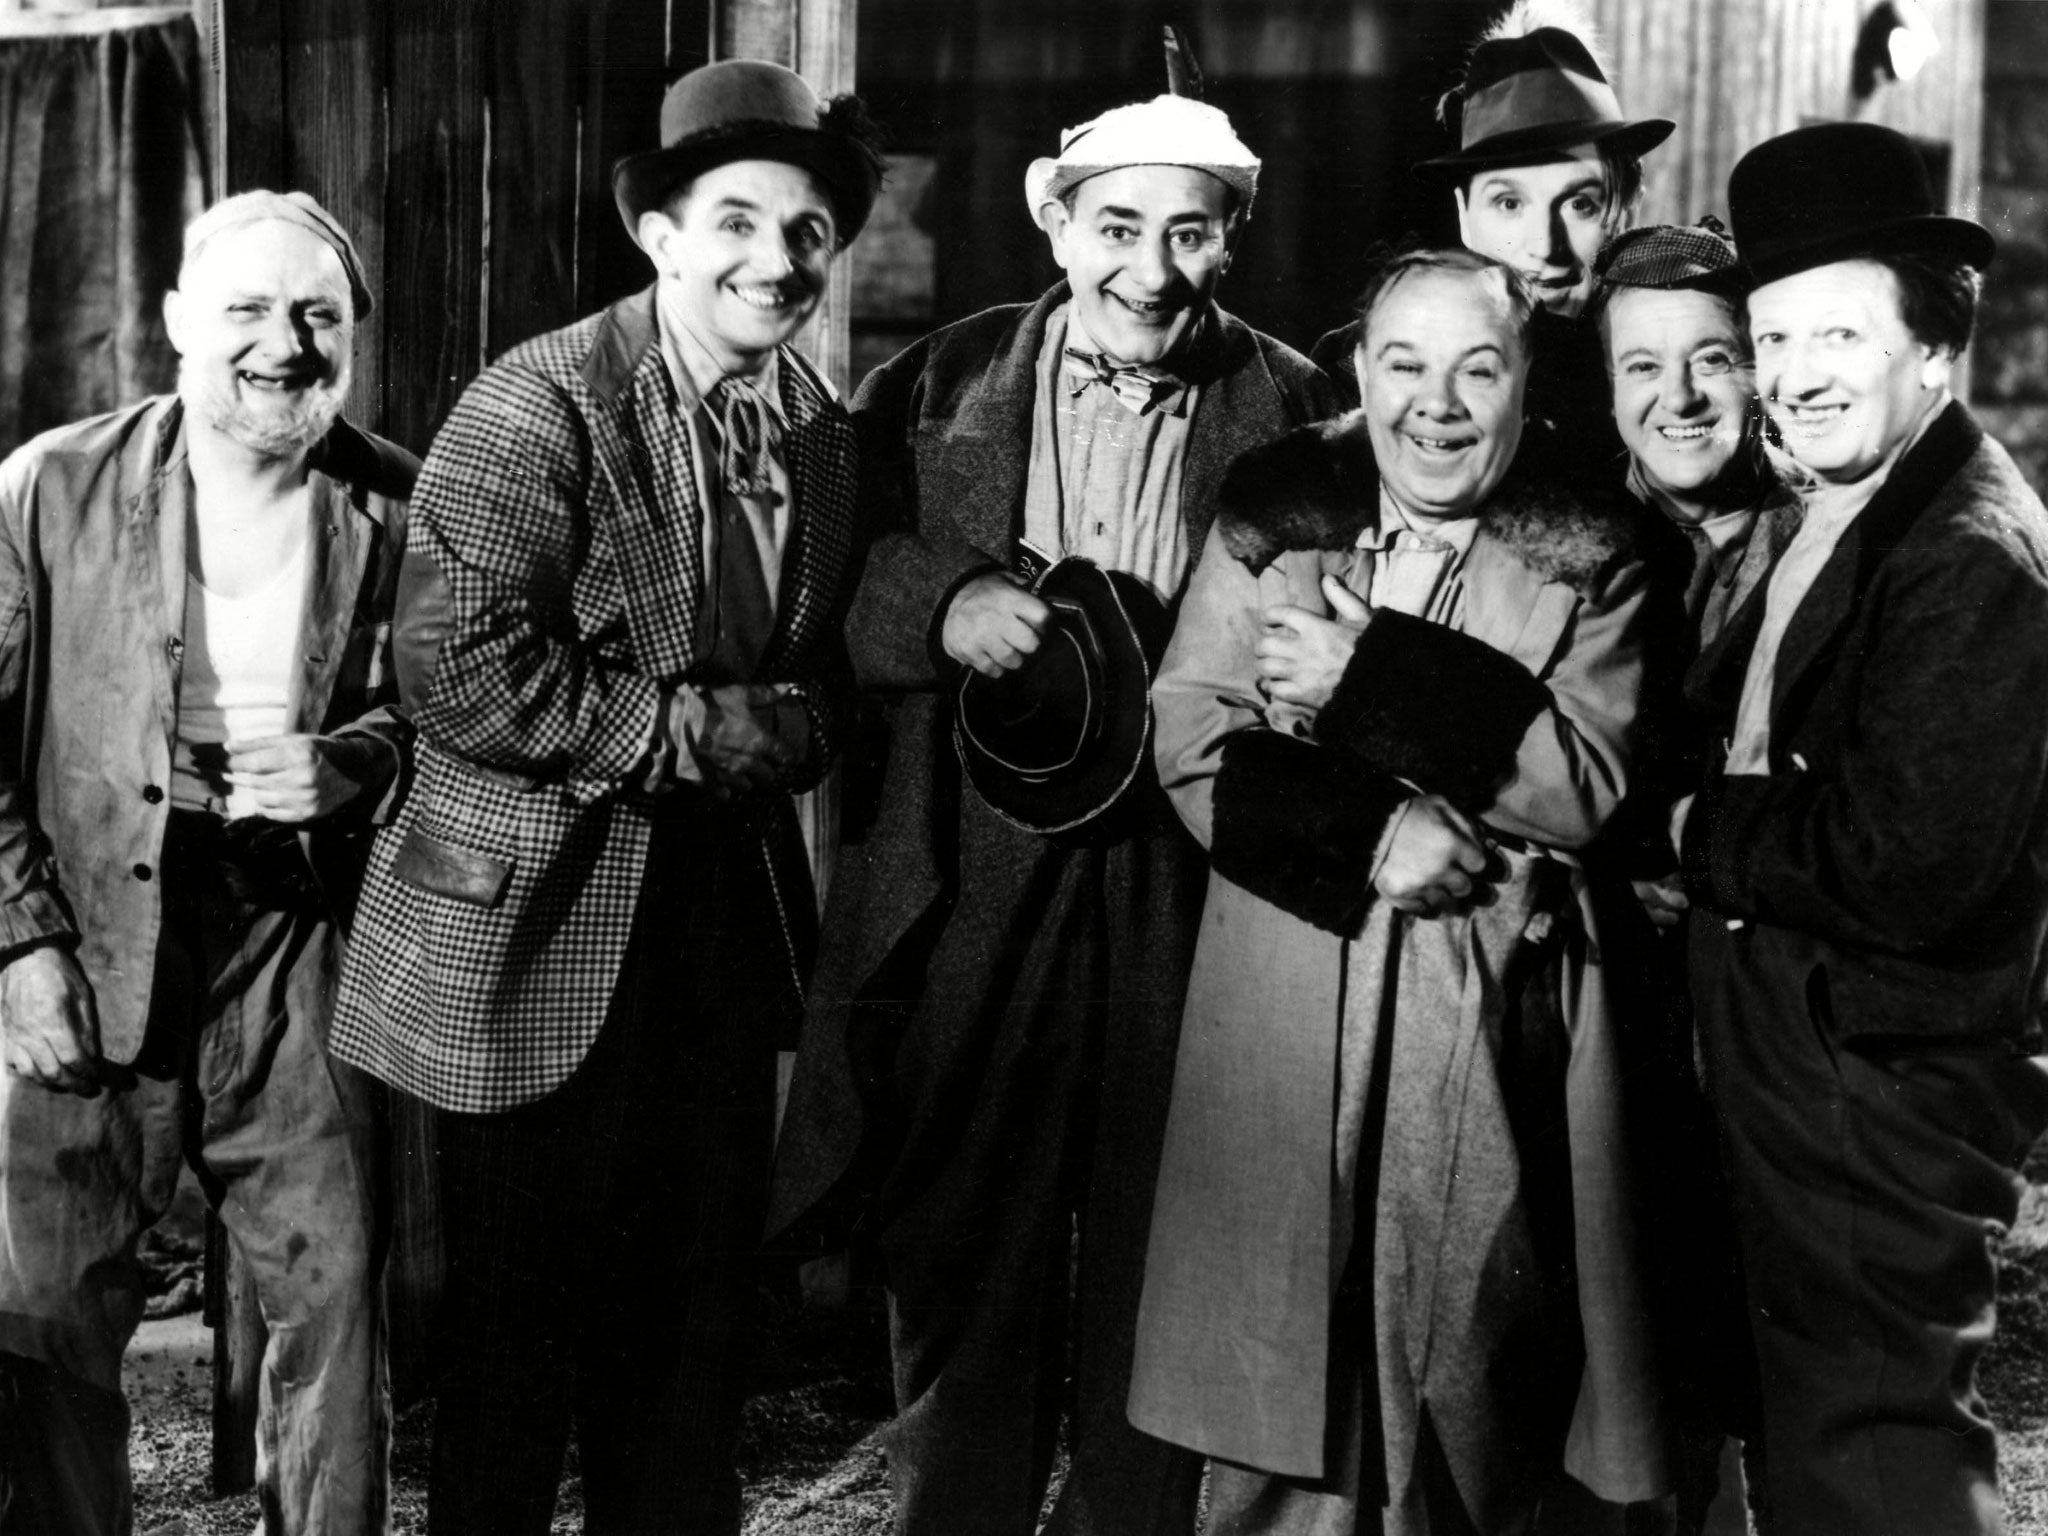 The Crazy Gang, hamming it up in 1941, 10 years after several acts joined forces